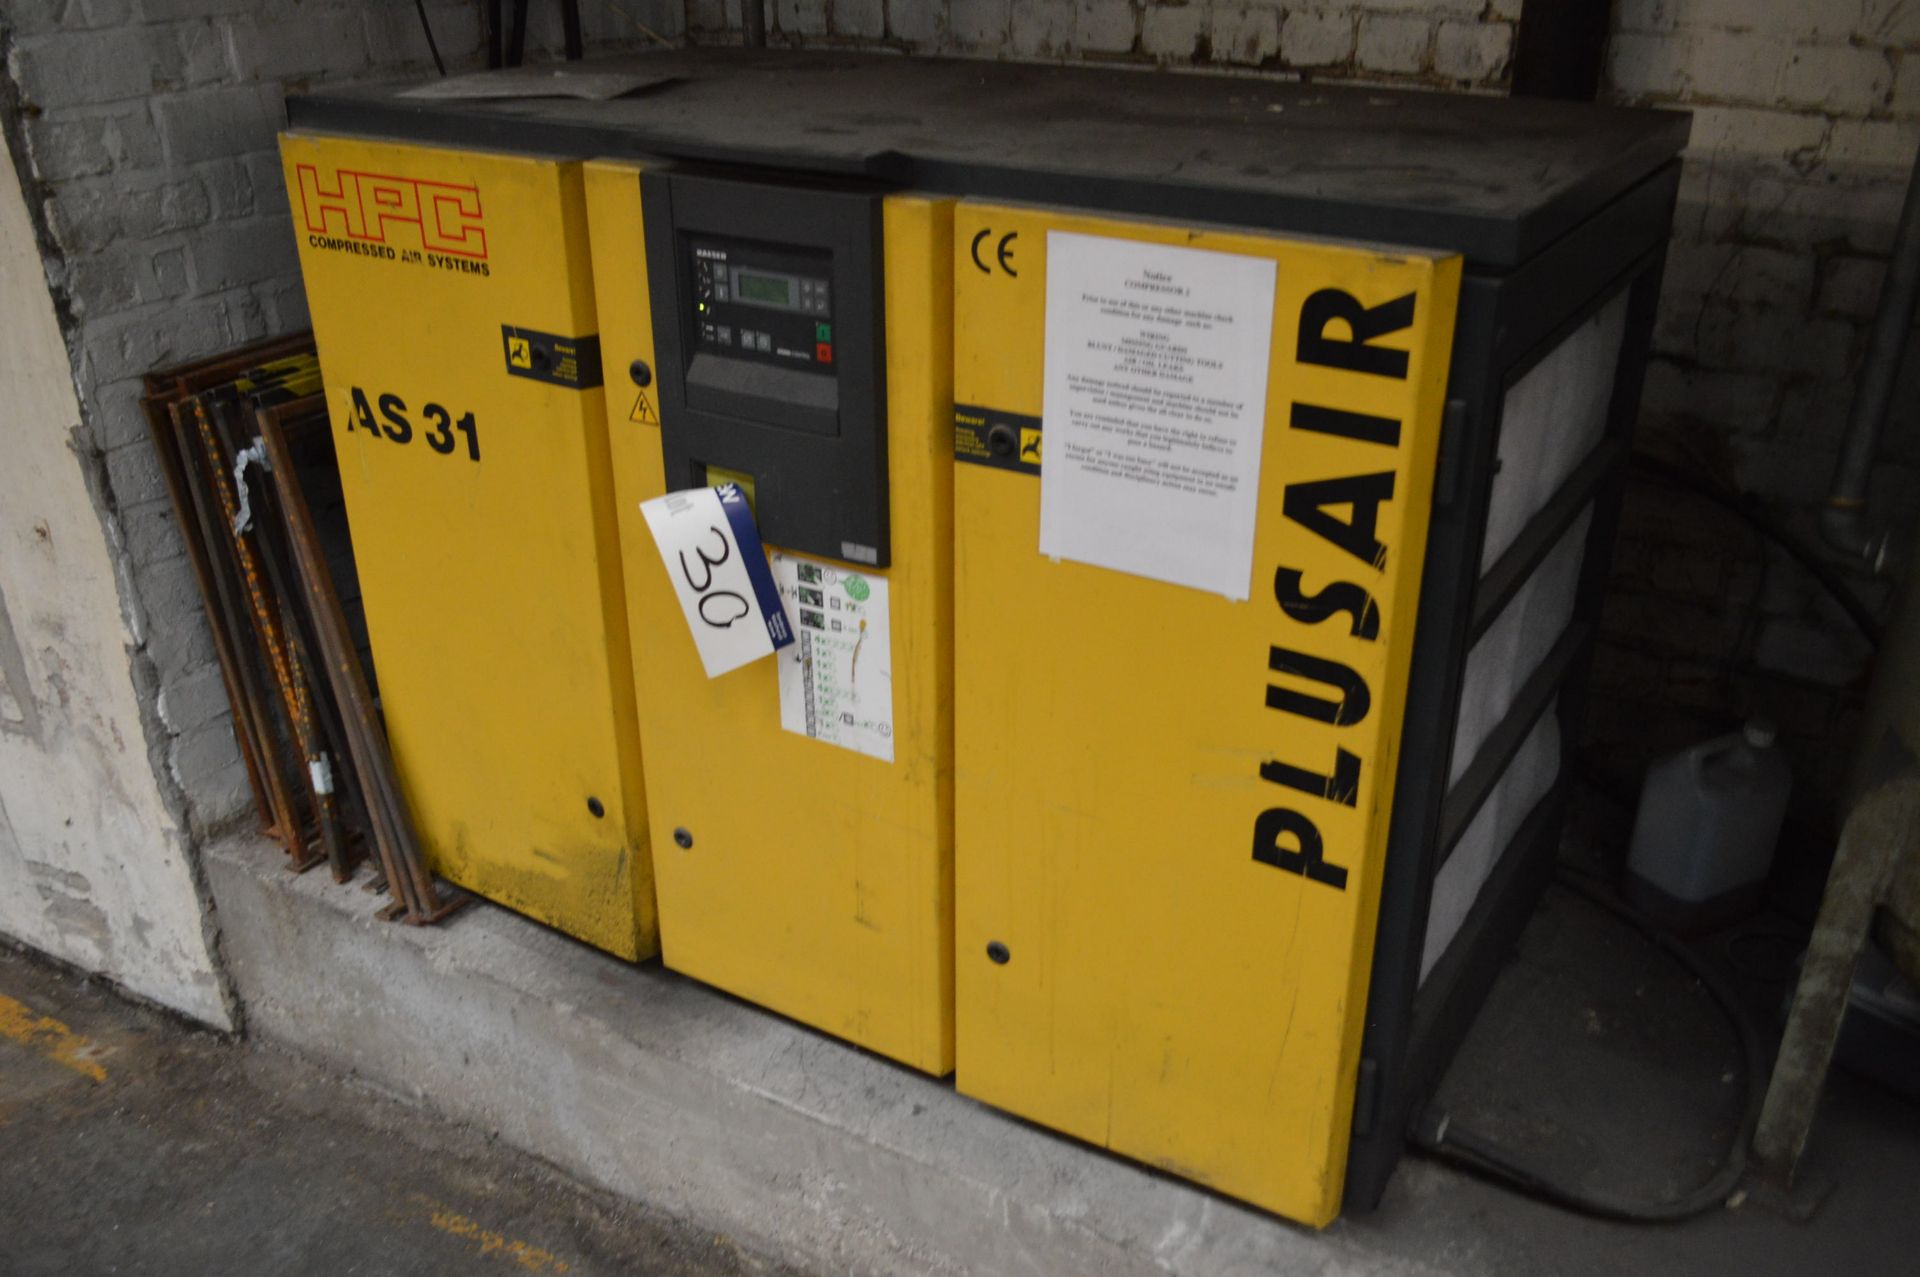 HPC AS31 Package Air Compressor, 21,282 hours (at